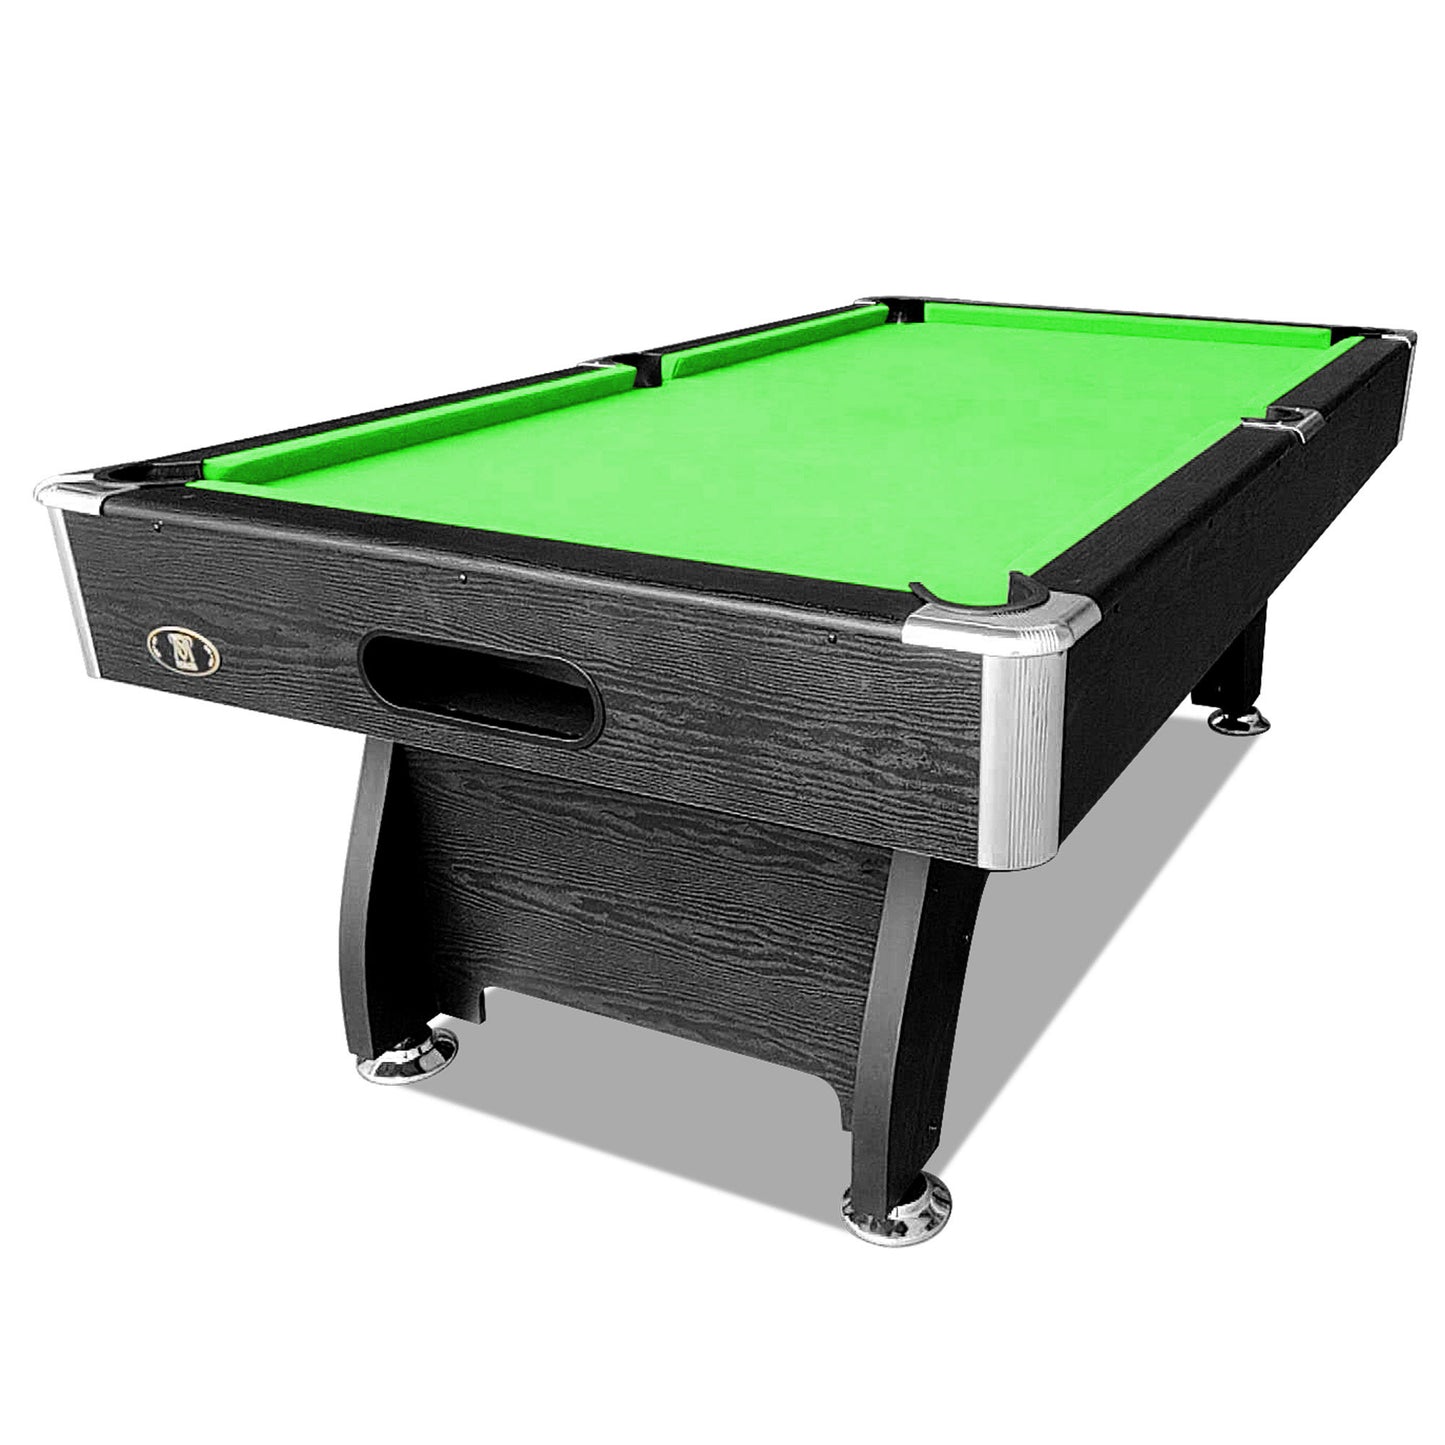 7FT MDF Pool Snooker Billiard Table with Accessories Pack, Black Frame - GREEN